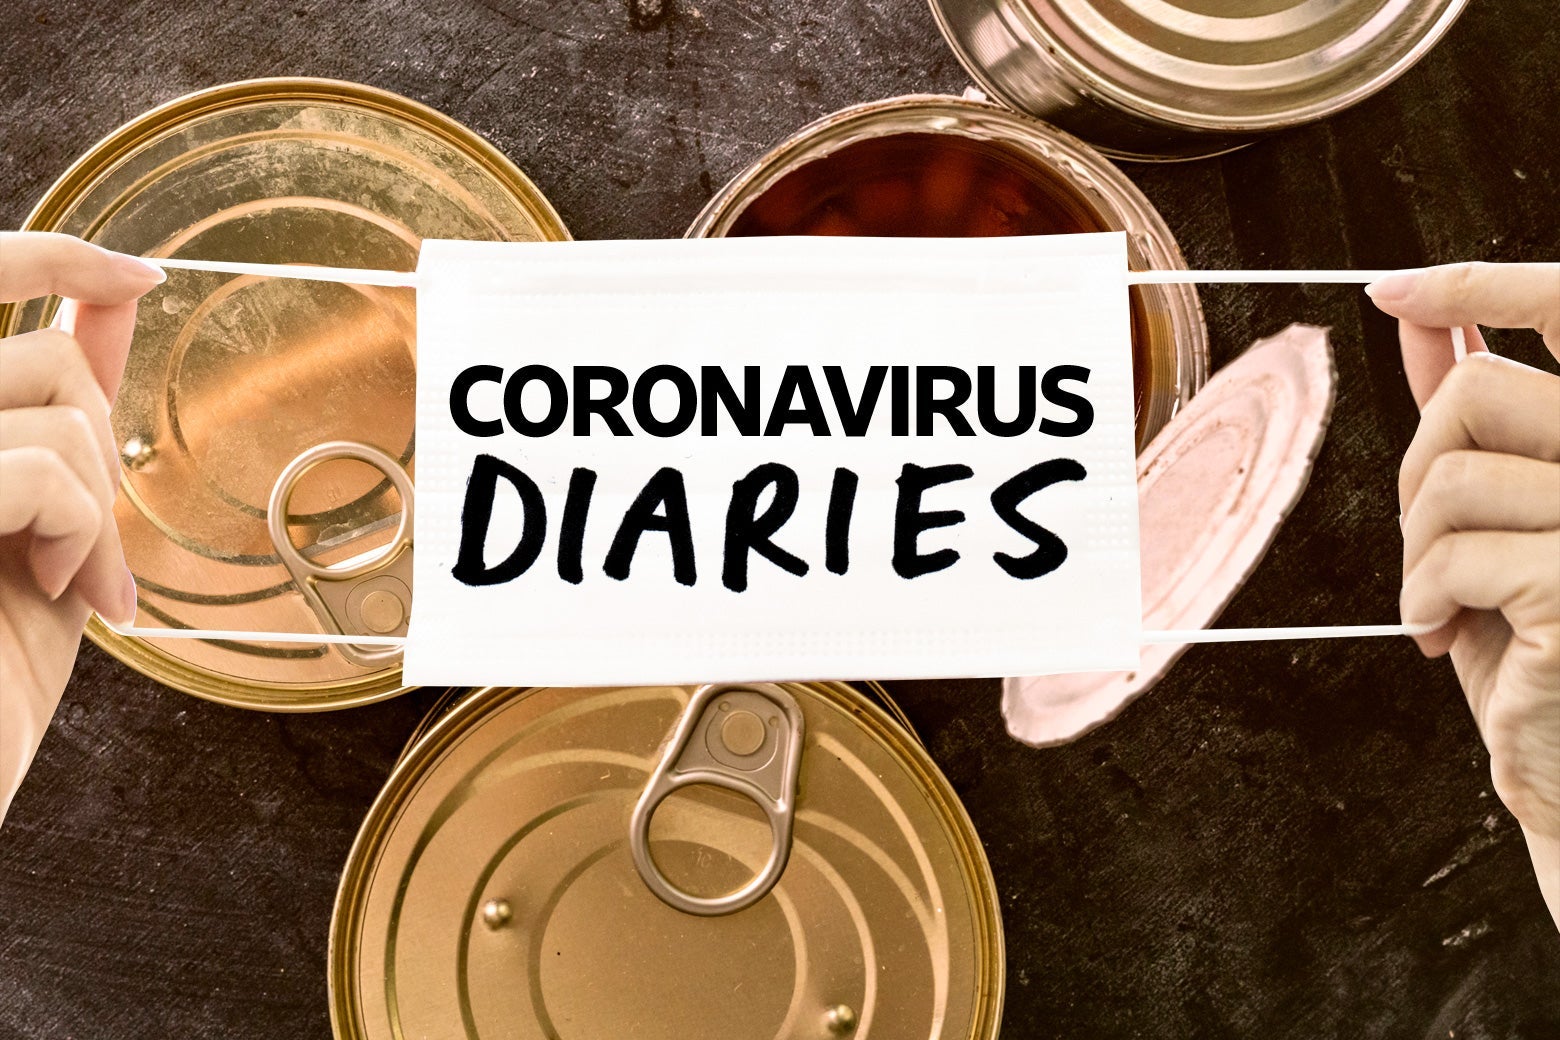 Two hands holding a medical mask over an image of cans of food. In the center of the mask, the words "Coronavirus Diaries."